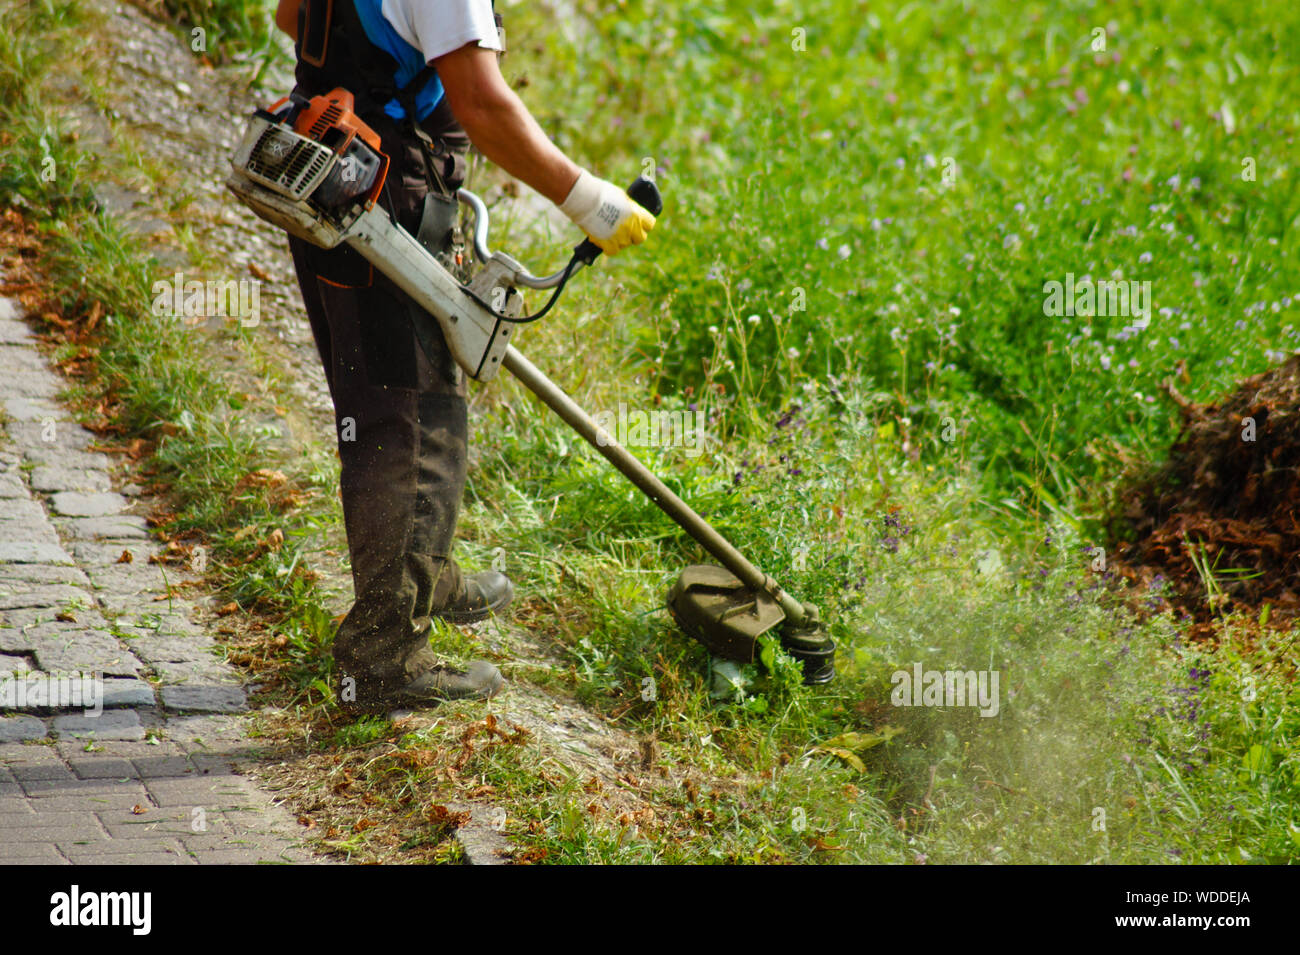 Low Section Man Cutting Grass With Strimmer In Yard Stock Photo